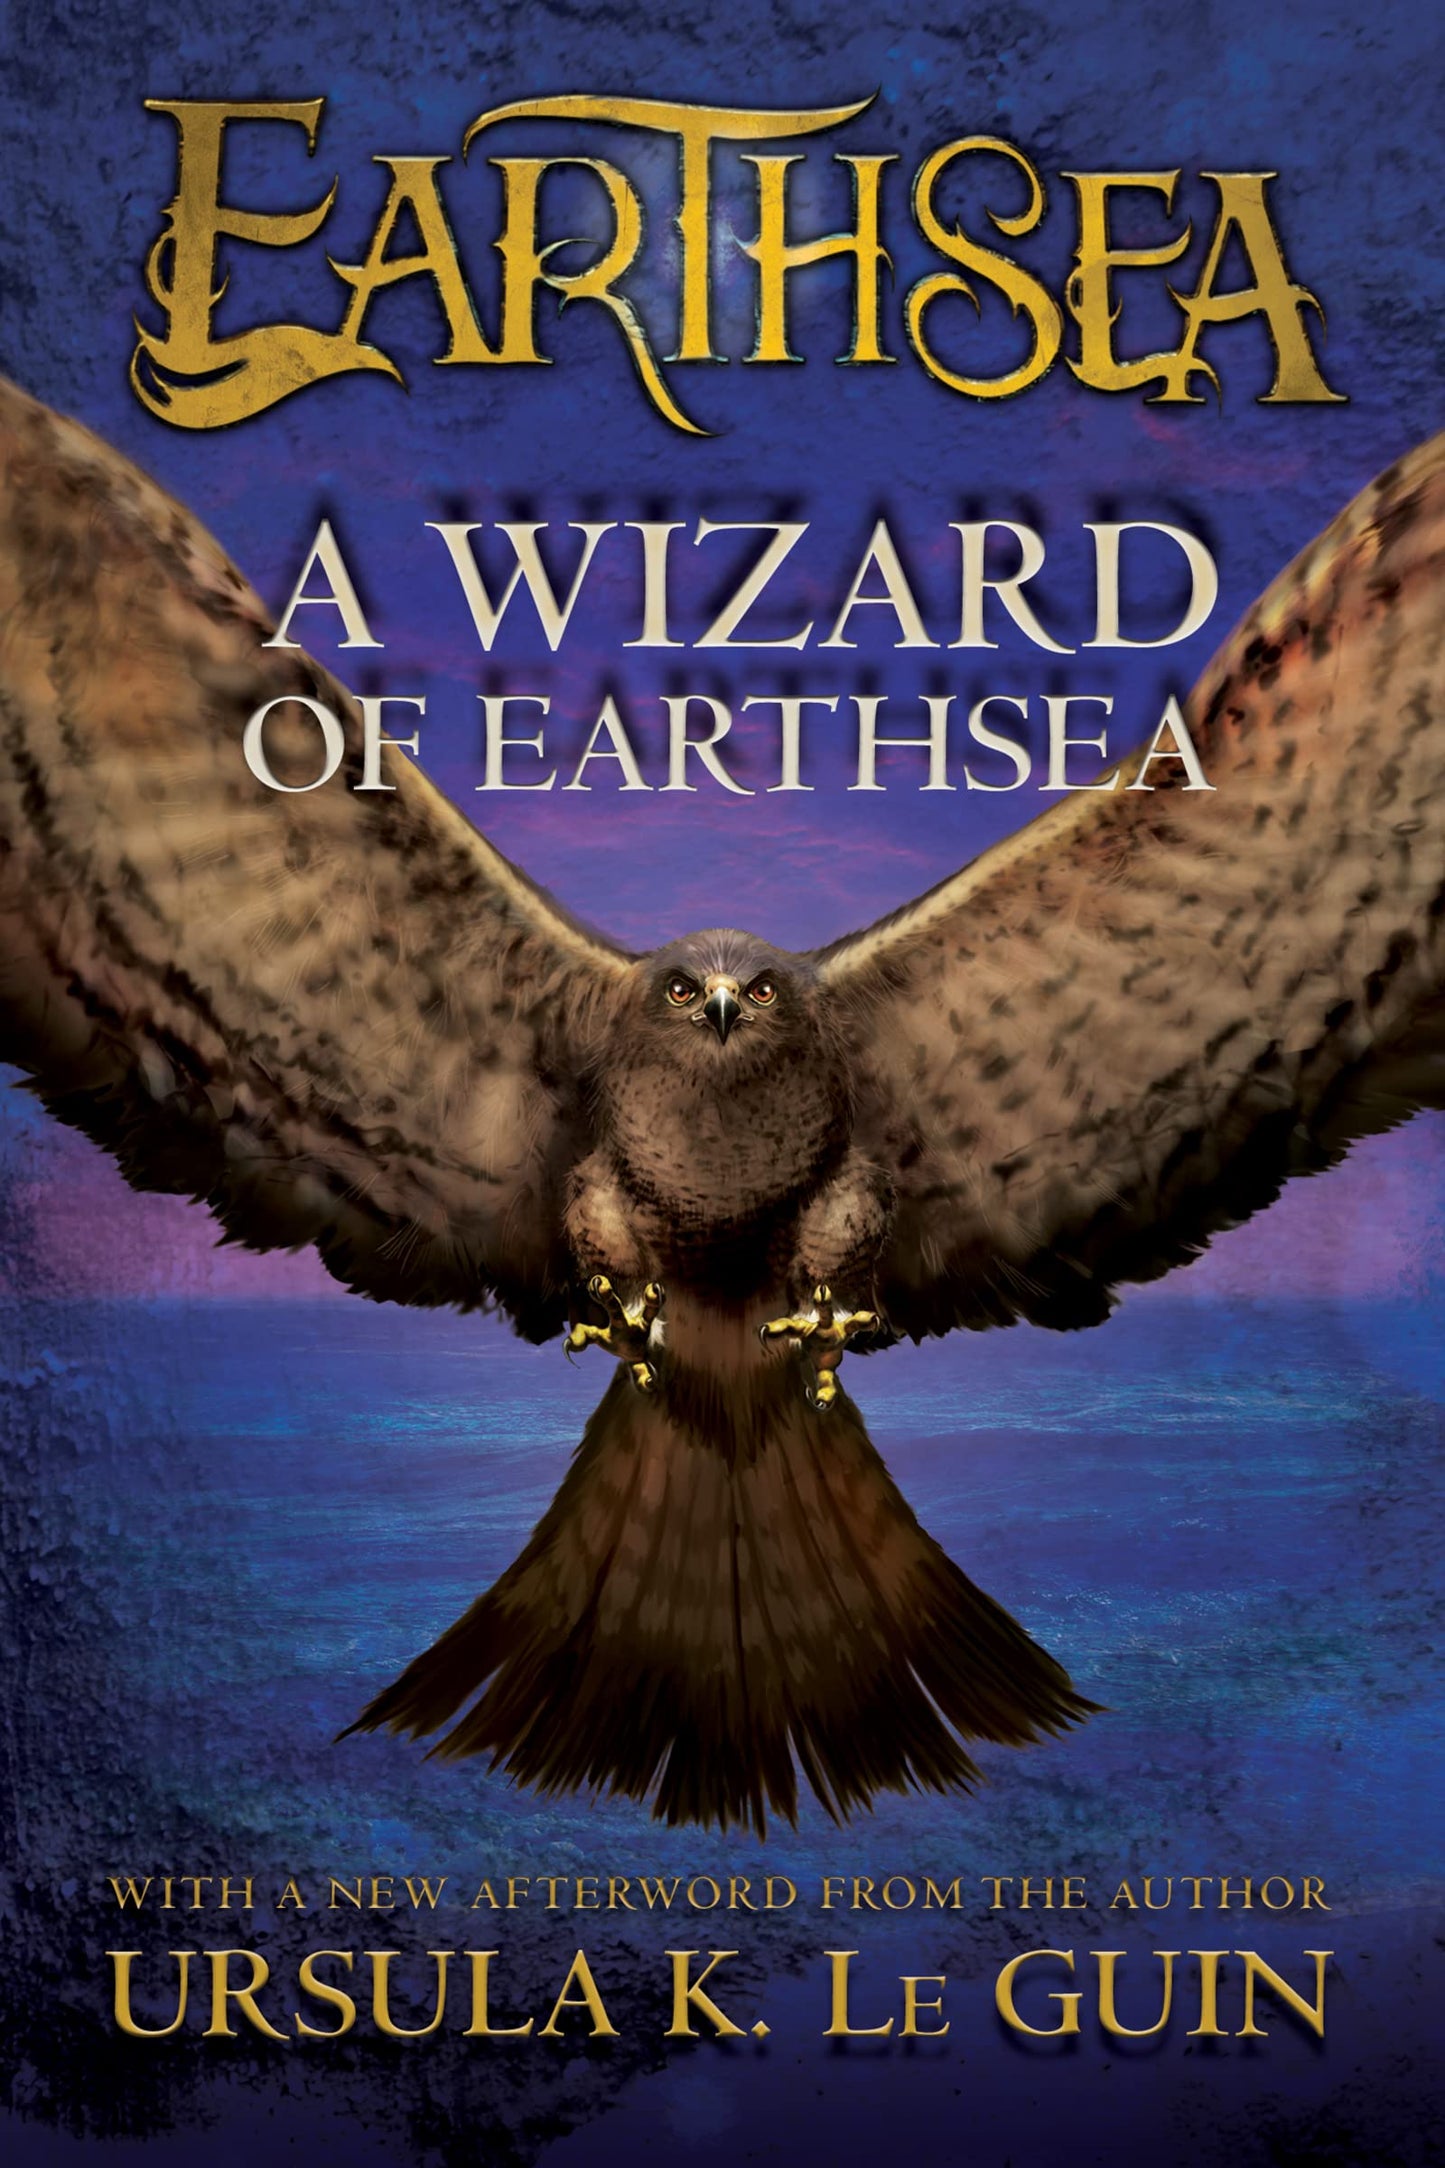 A Wizard of Earthsea, by Ursula K. Le Guin